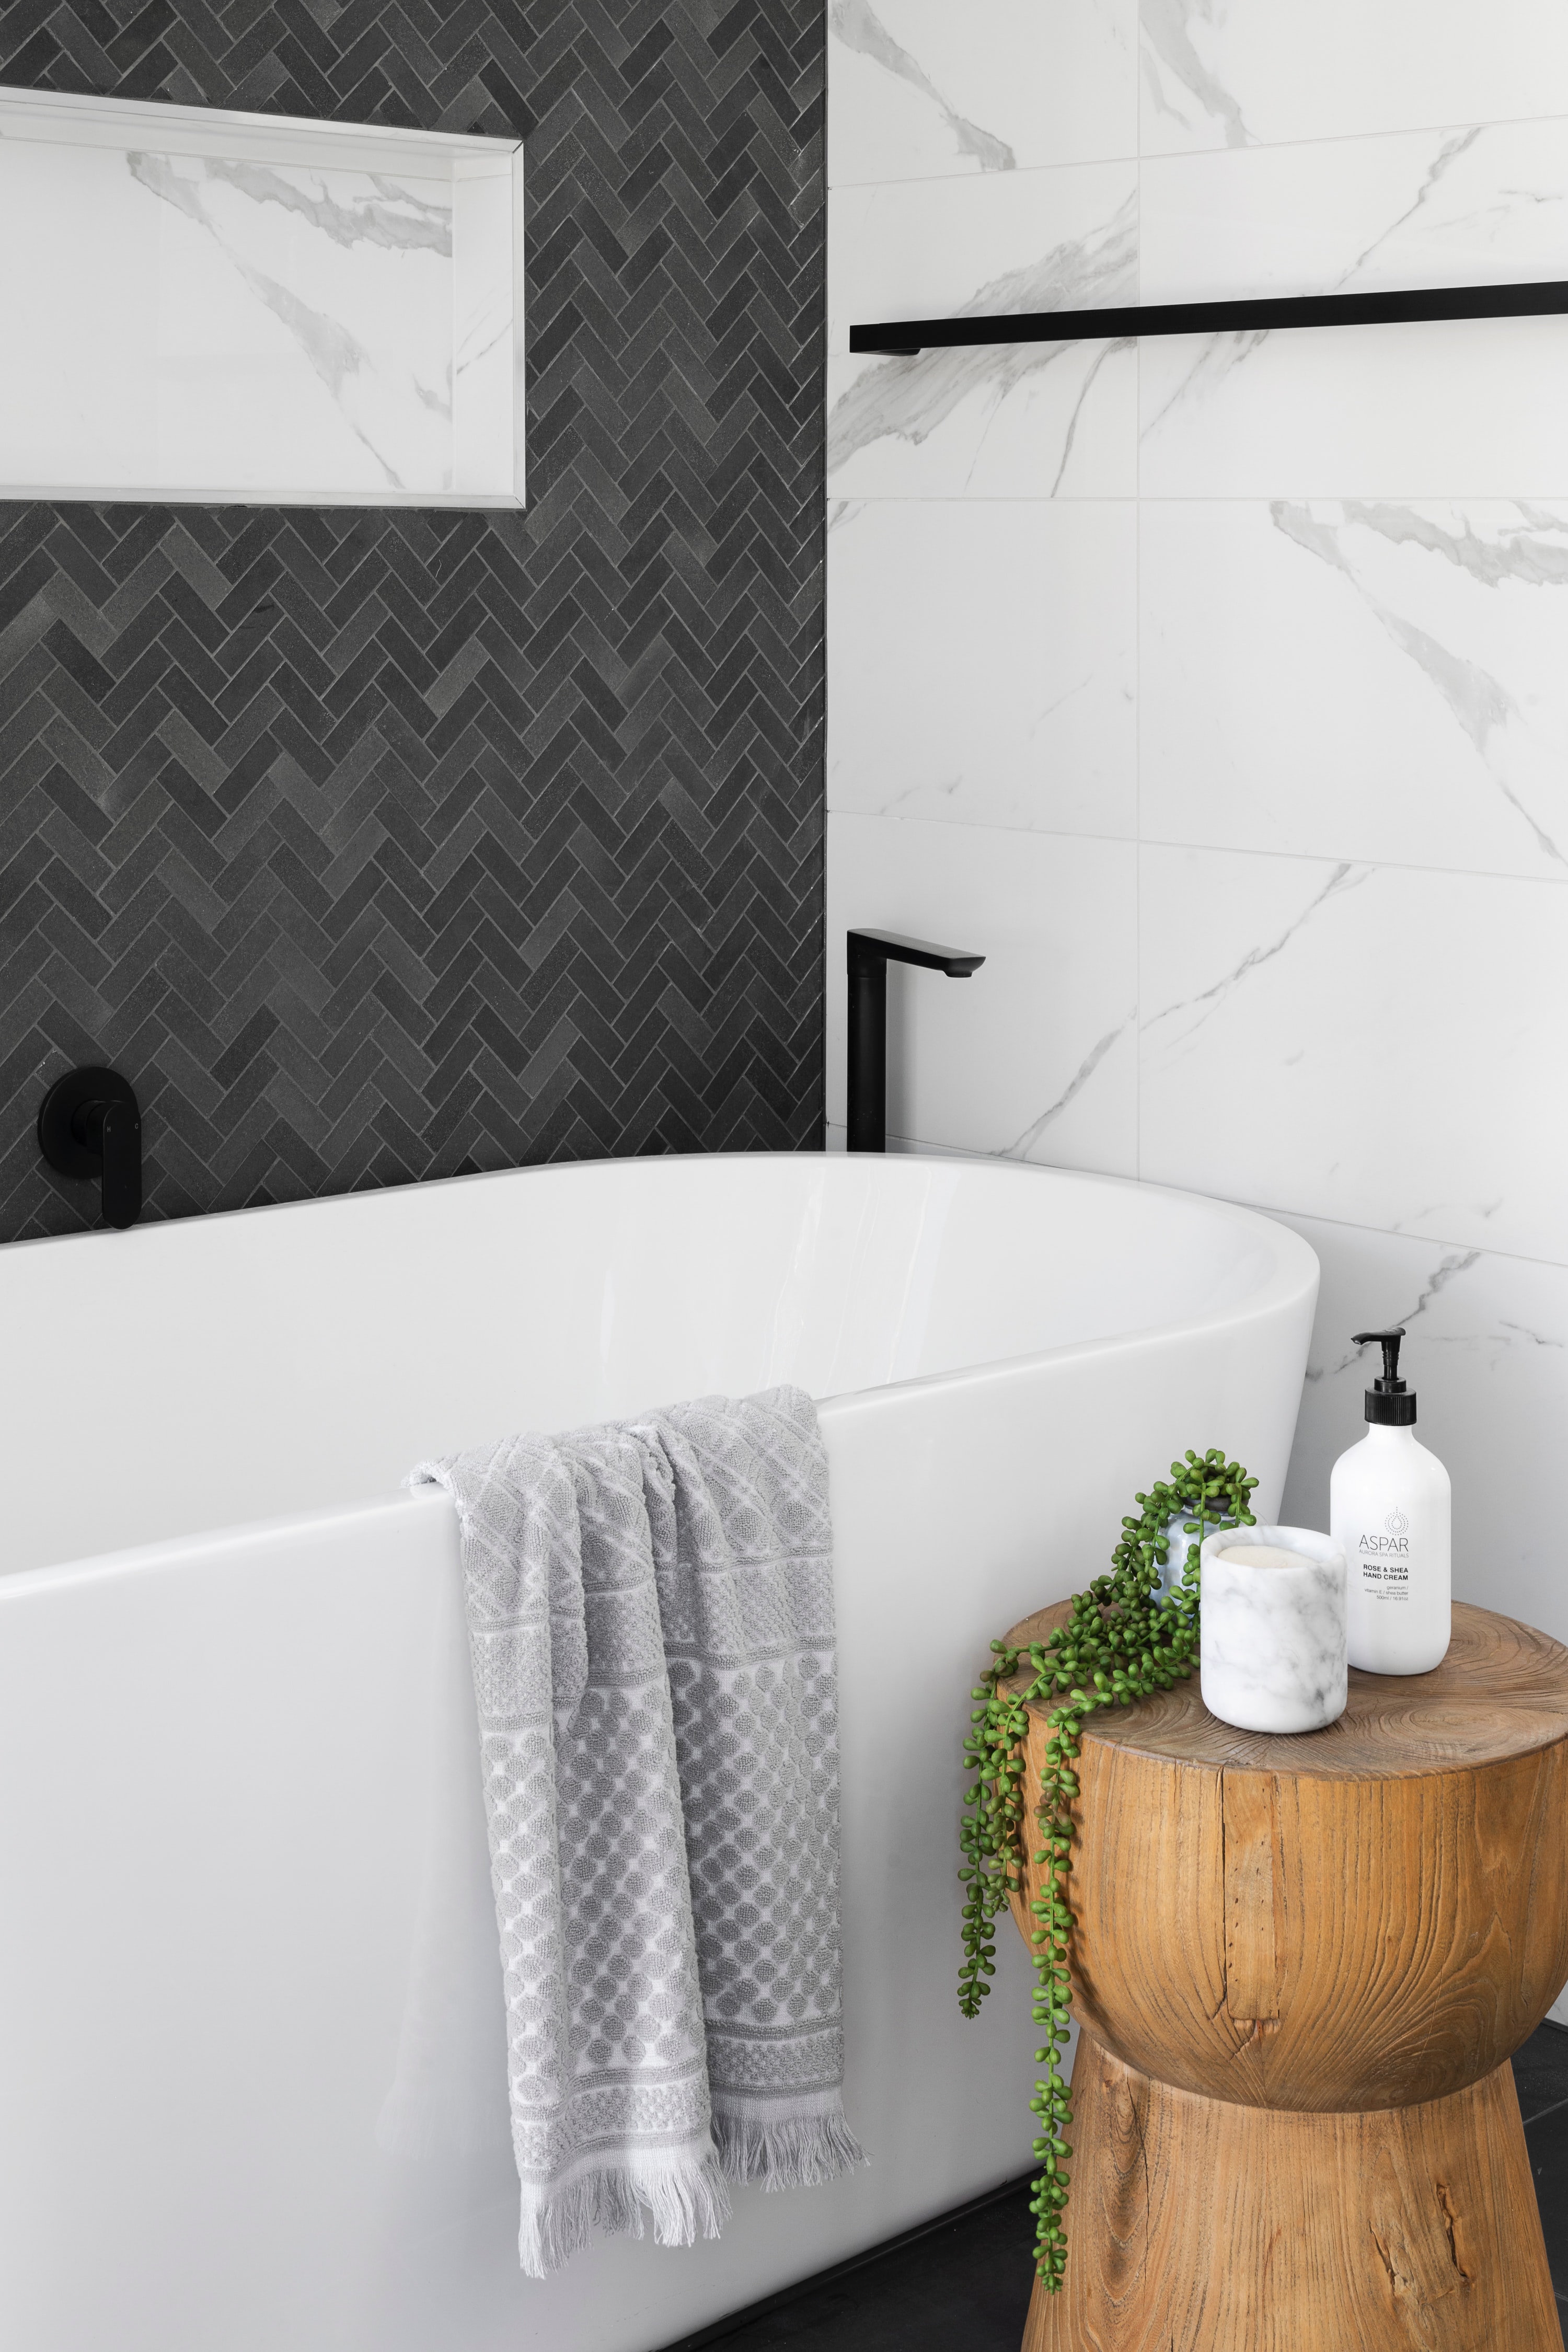 The Bathroom Remodeling Process: 11 Key Steps in a Successful Bathroom Remodel